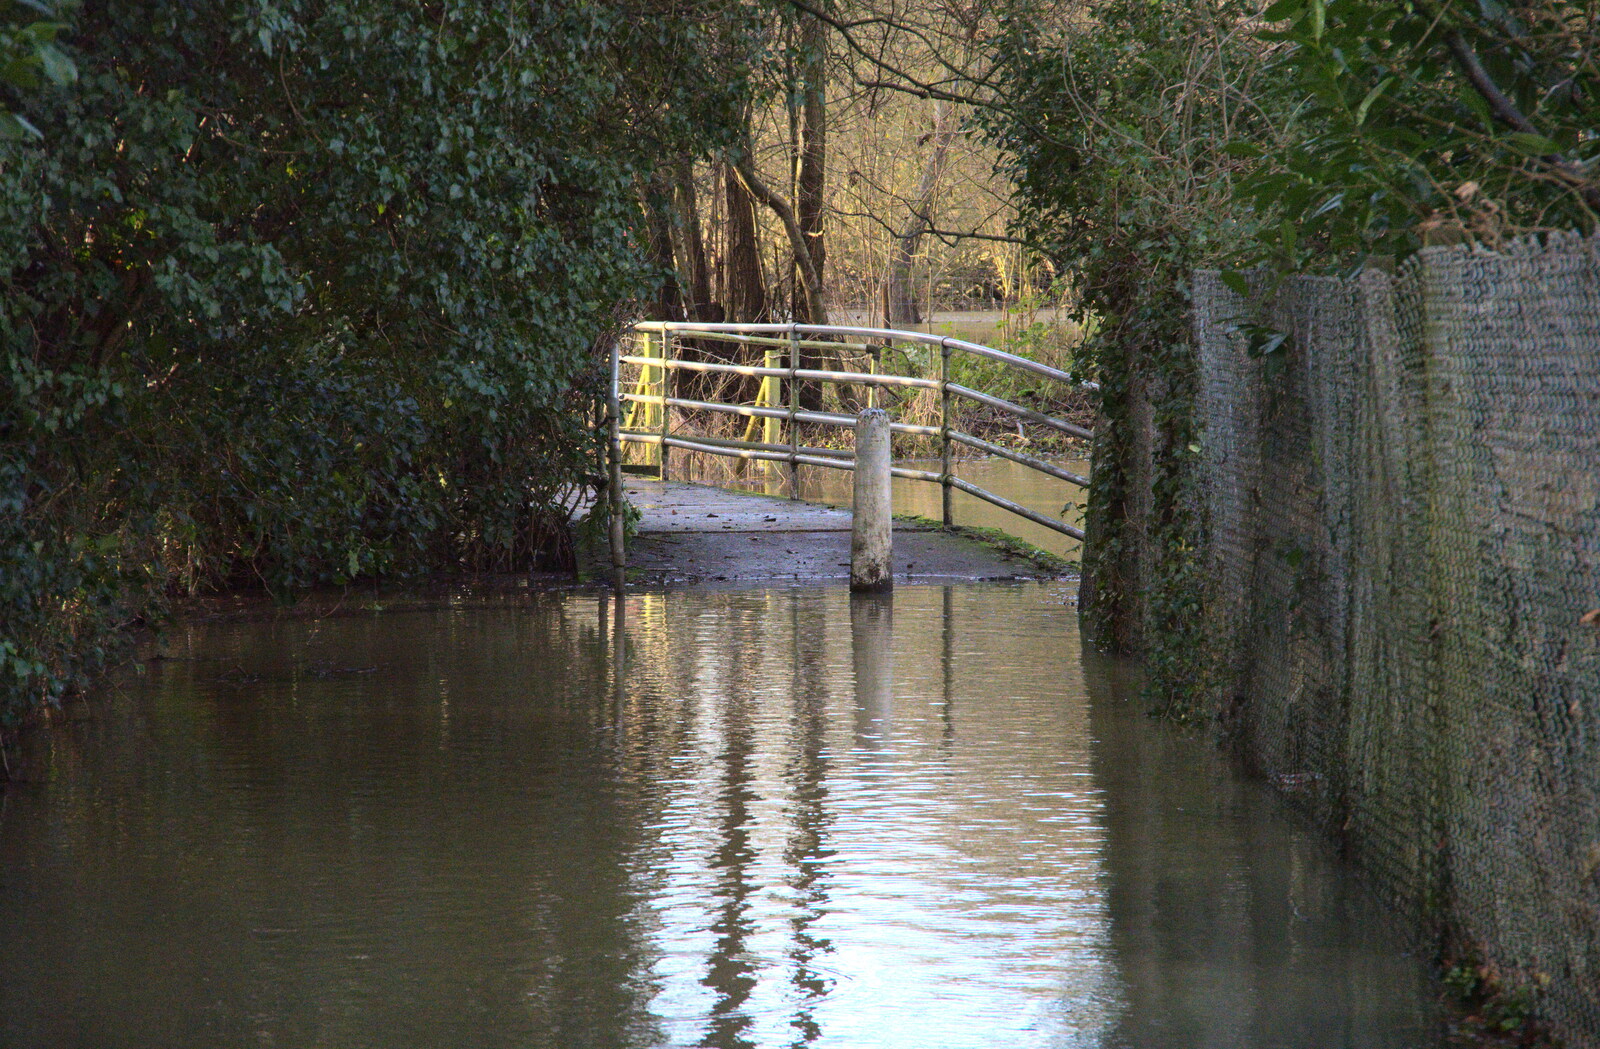 The footbridge peeks out above the water from The Christmas Eve Floods, Diss, Norfolk - 24th December 2020